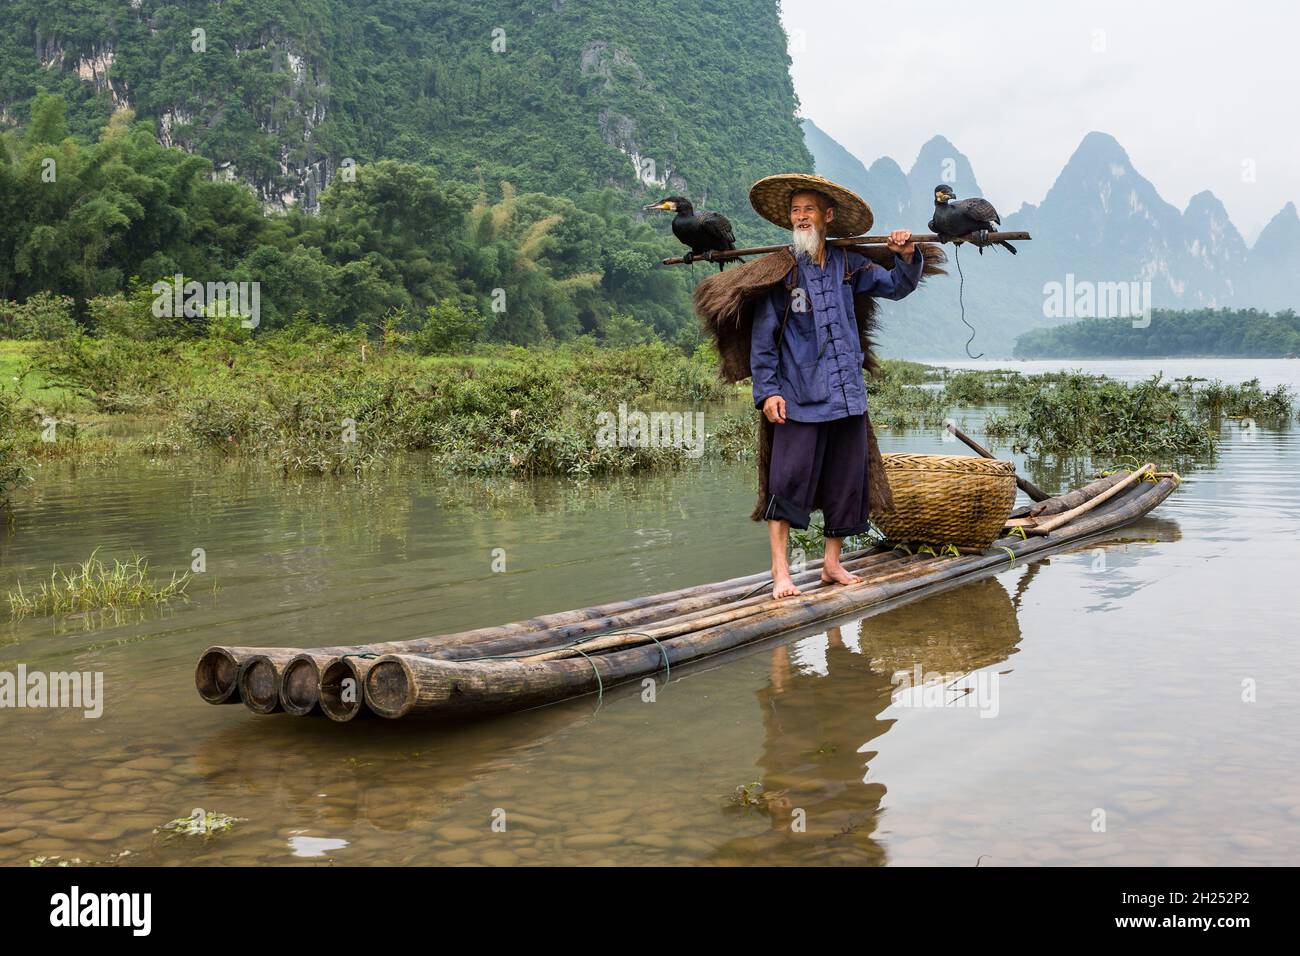 An elderly cormorant fisherman with cormorants perched on a bamboo